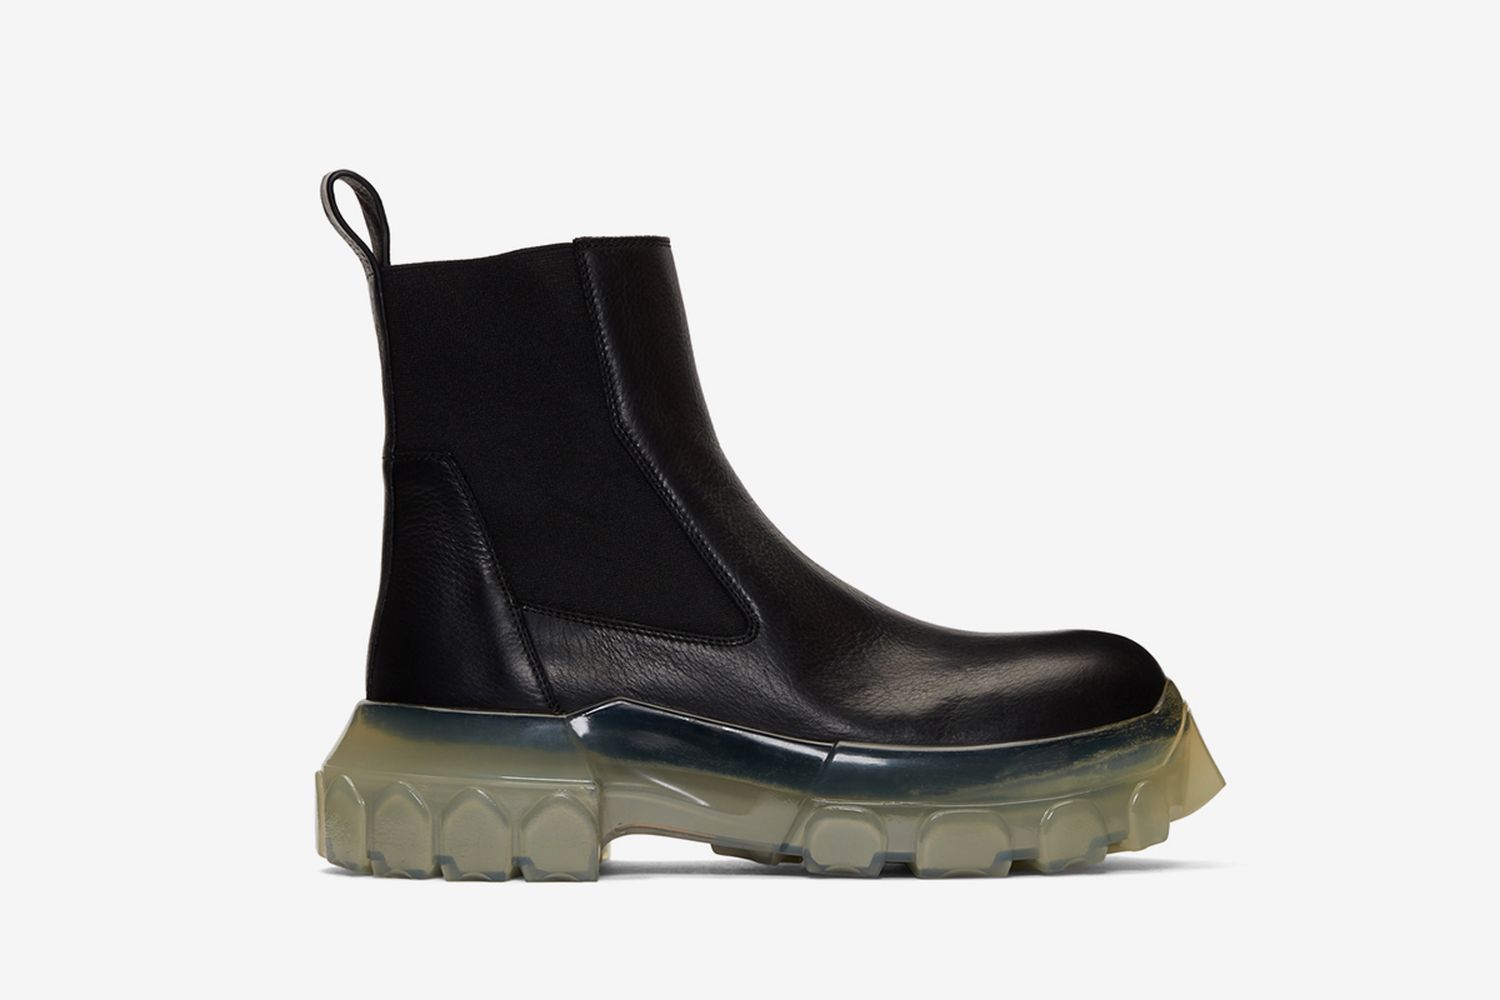 Rick owens tractor. Rick Owens tractor Boots. Rick Owens обувь. Rick Owens tractor Boots Bozo. Rick Owens сапоги.